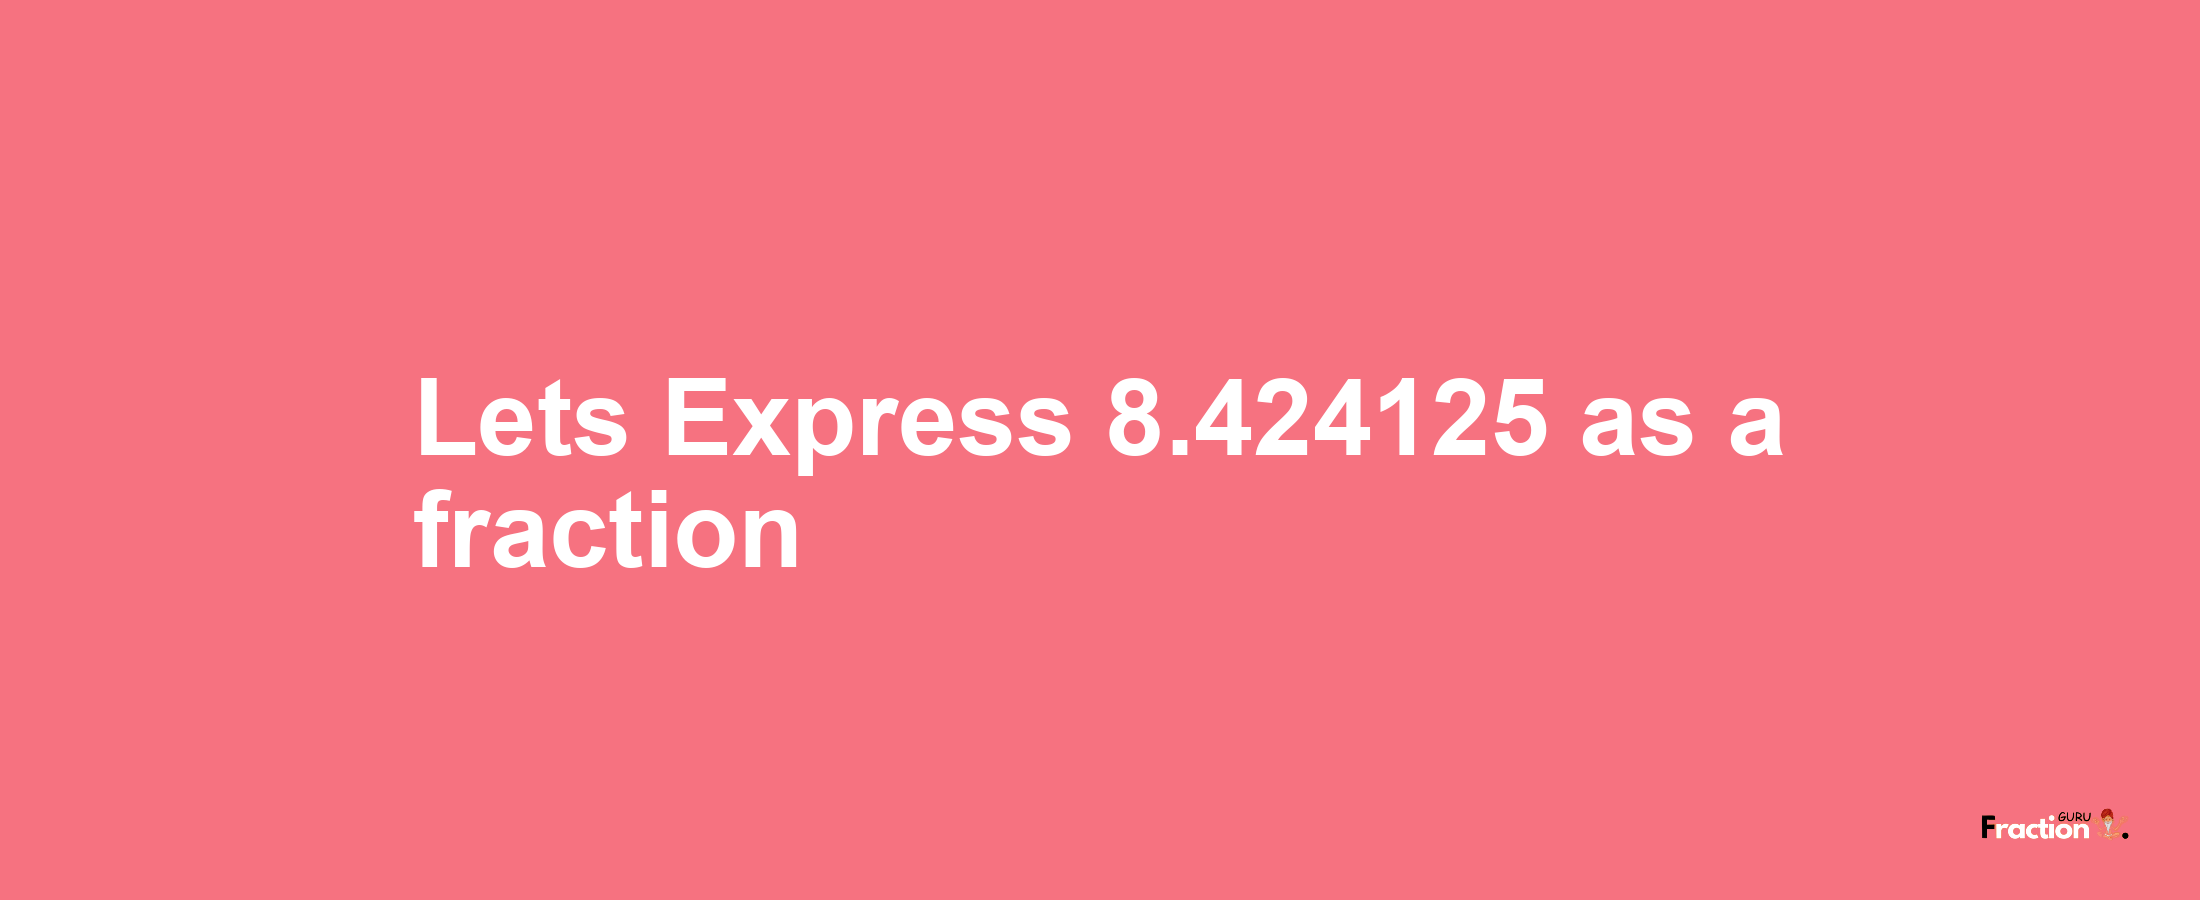 Lets Express 8.424125 as afraction